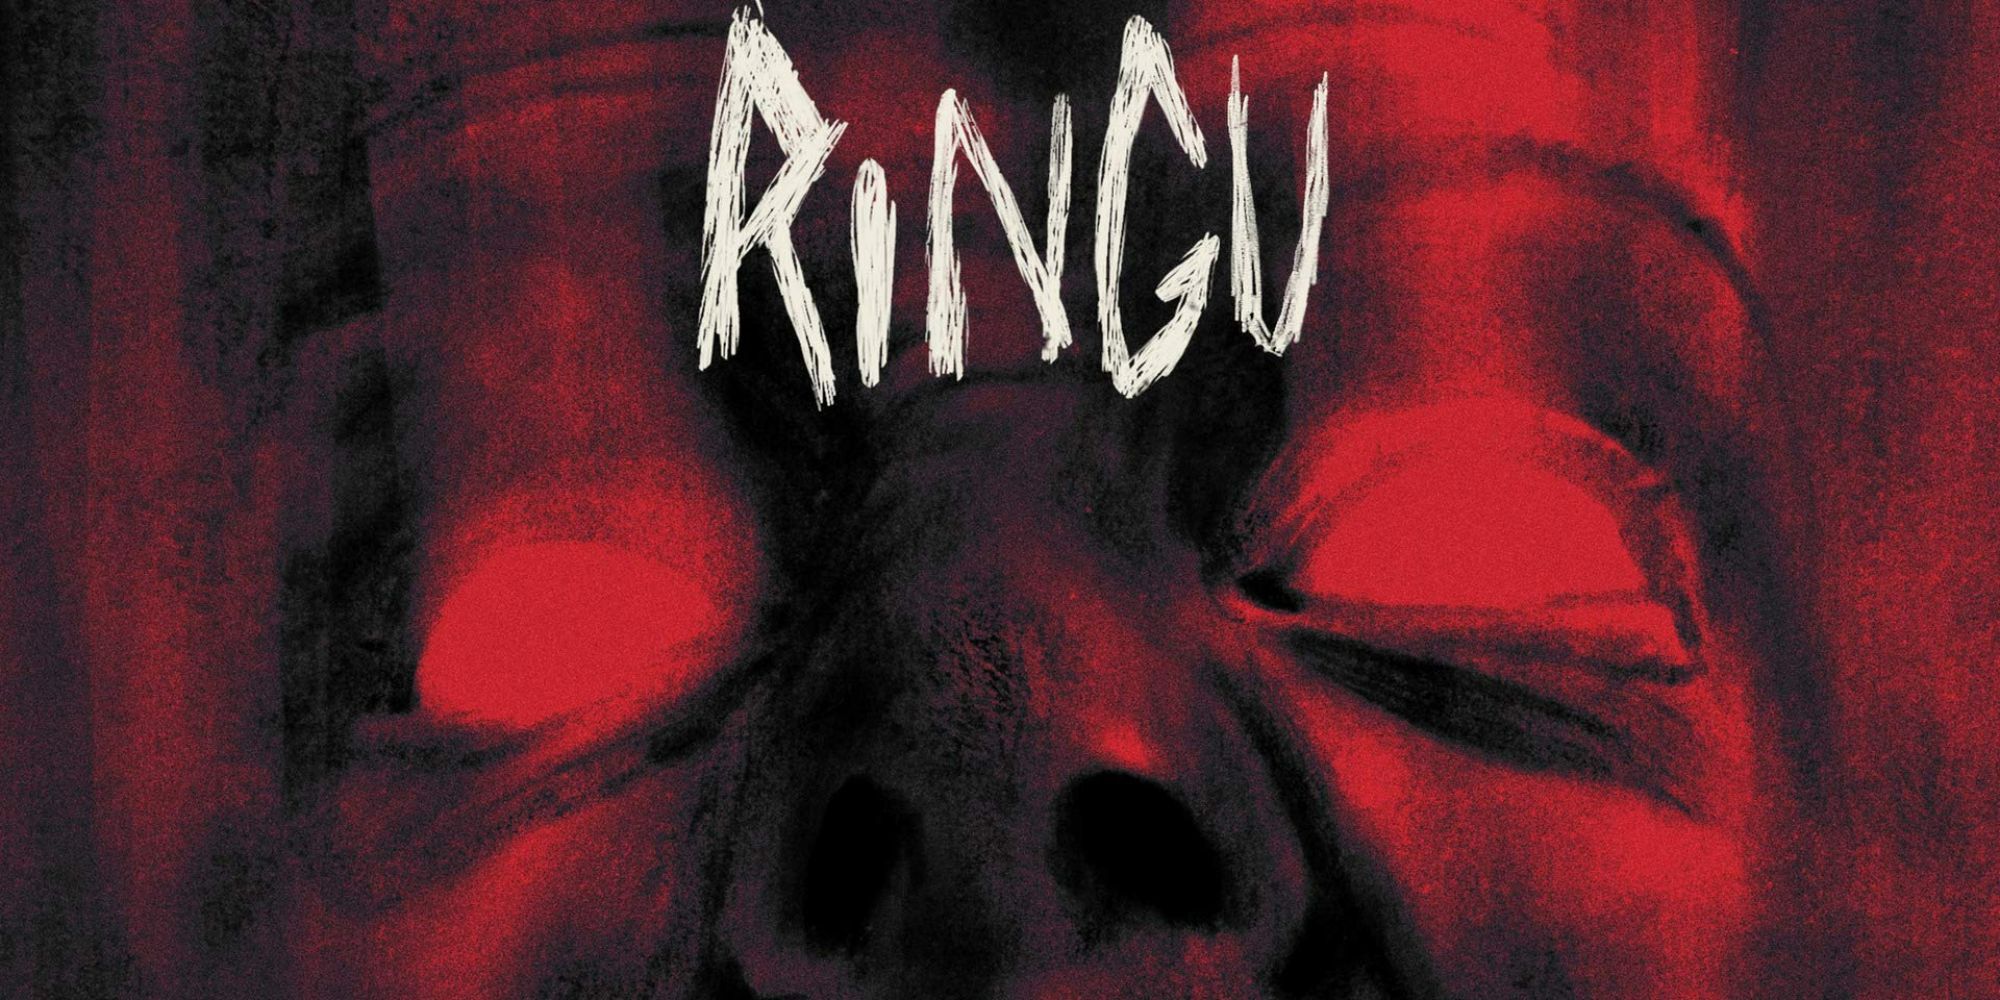 The title card for Ringu, a close-up on a red face